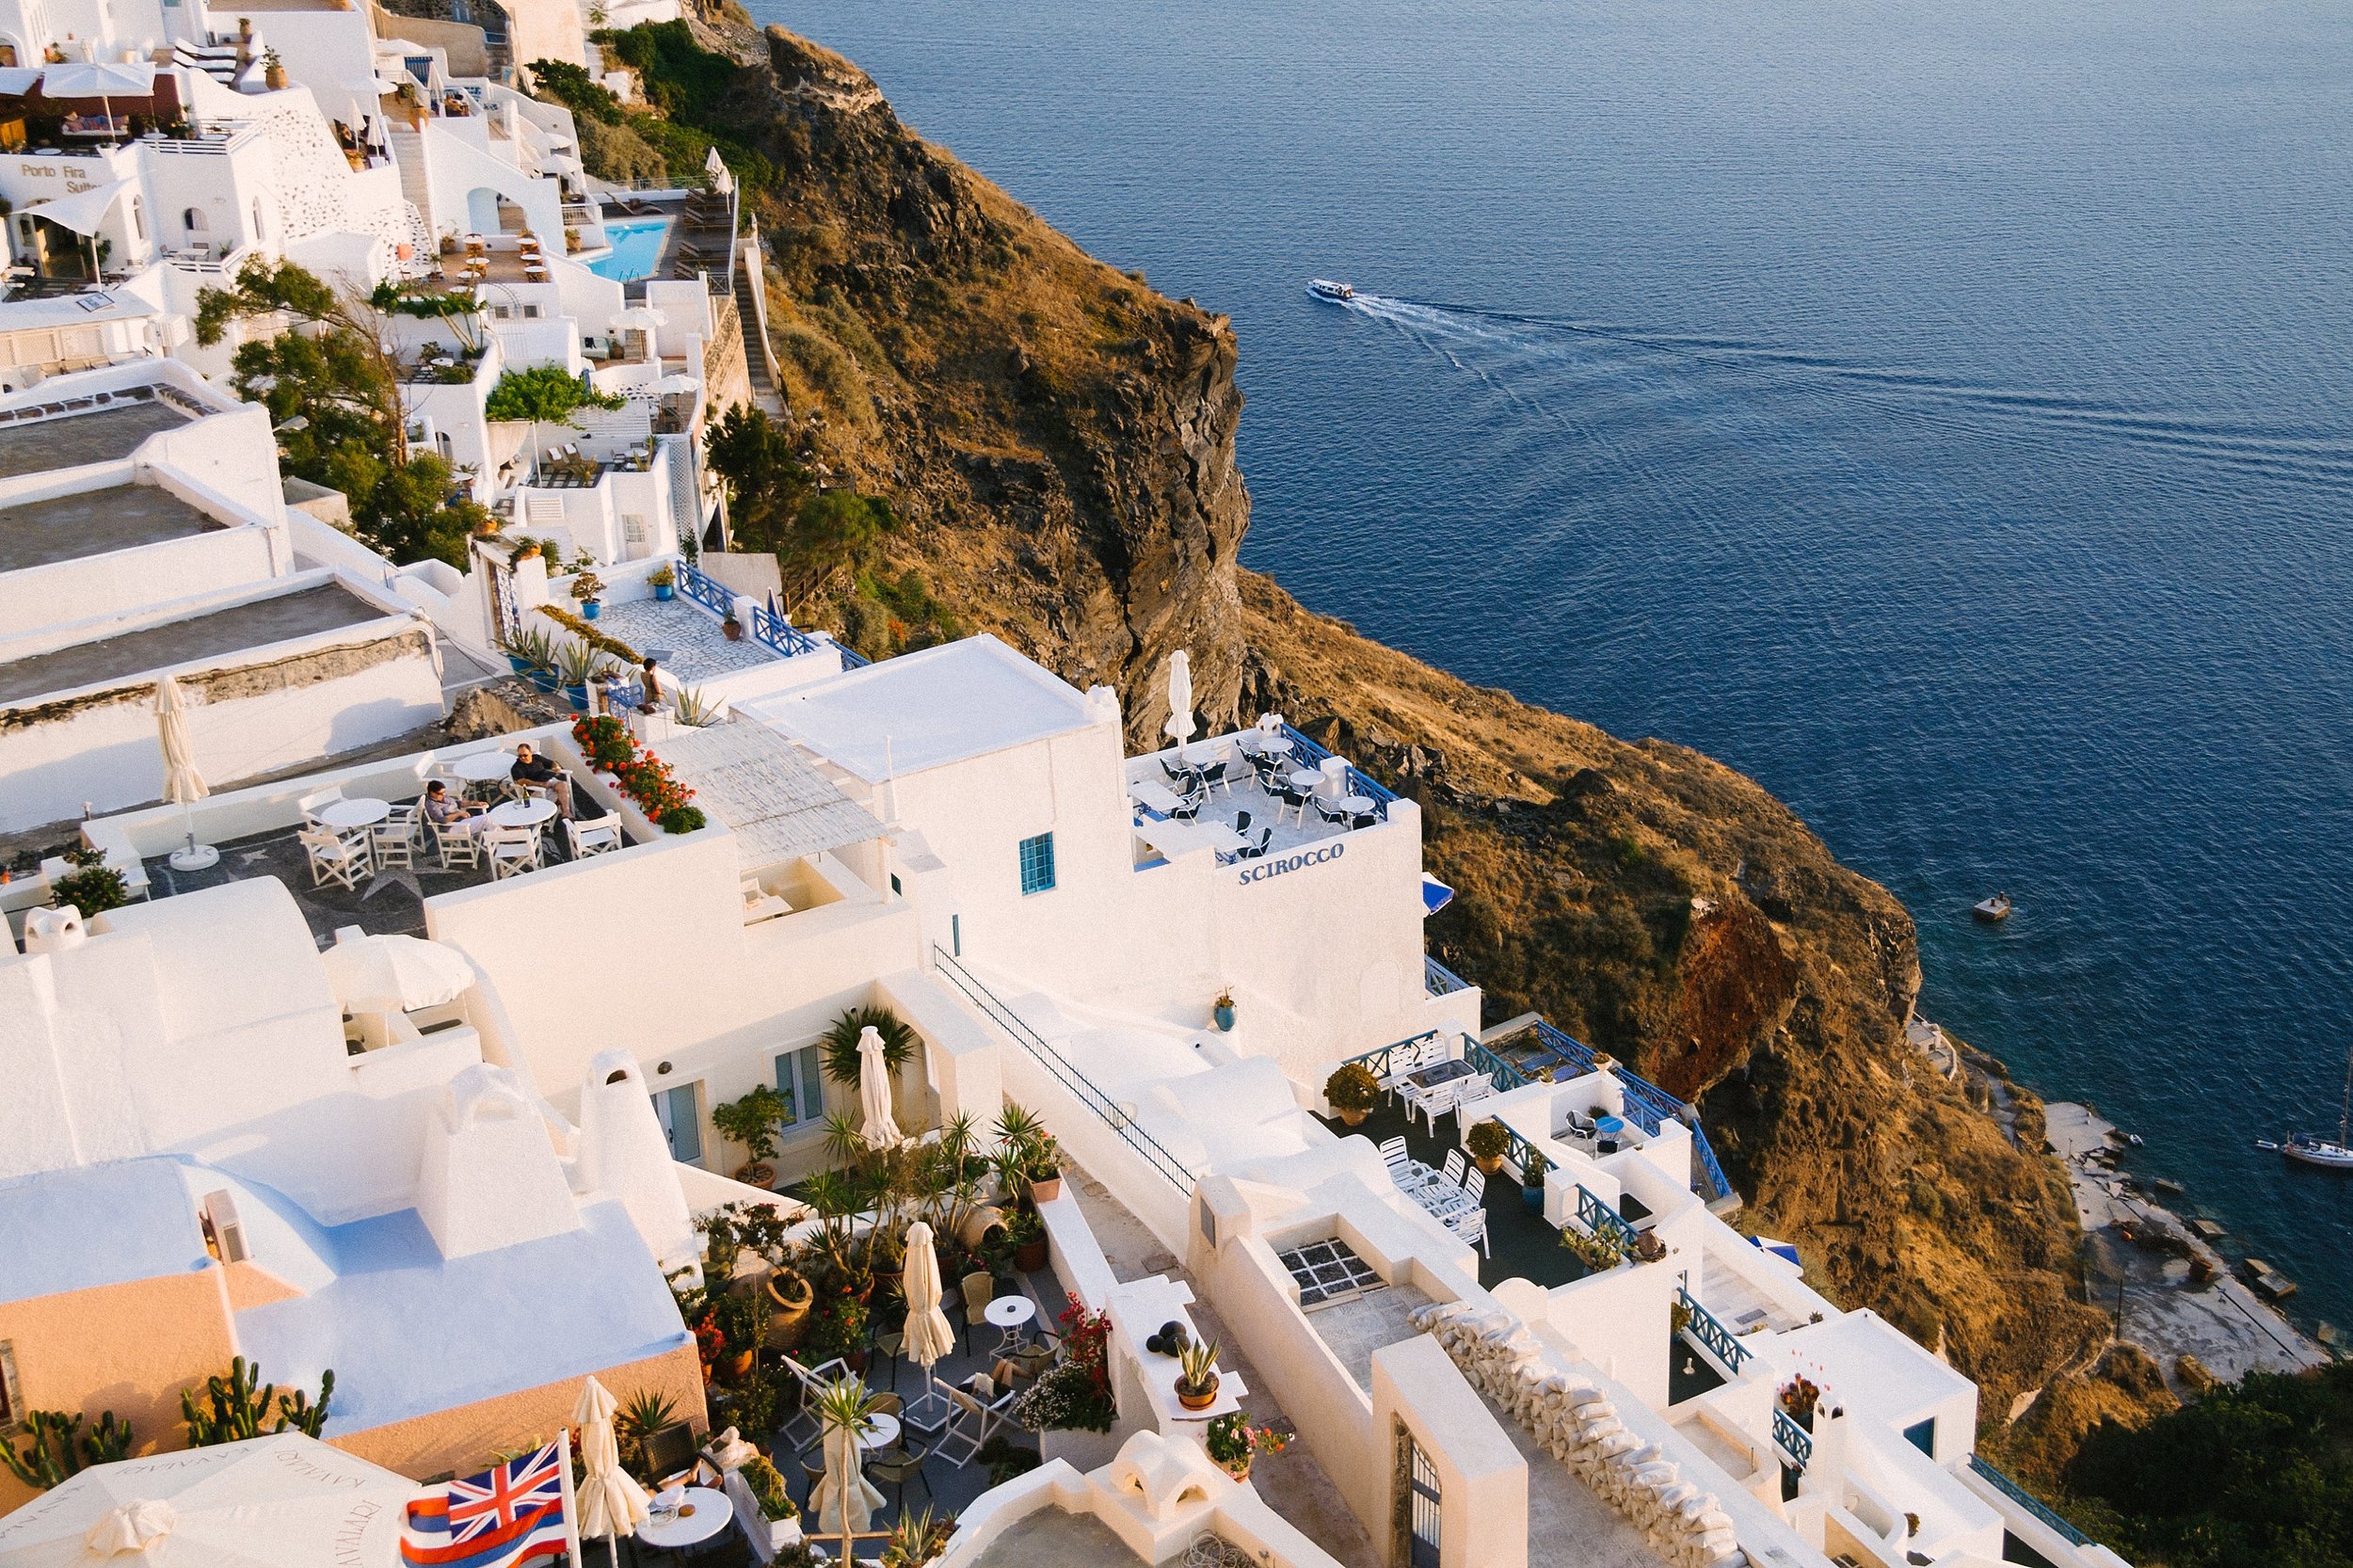  Just as sun starts to dip, overlooking the caldera in Fira. 